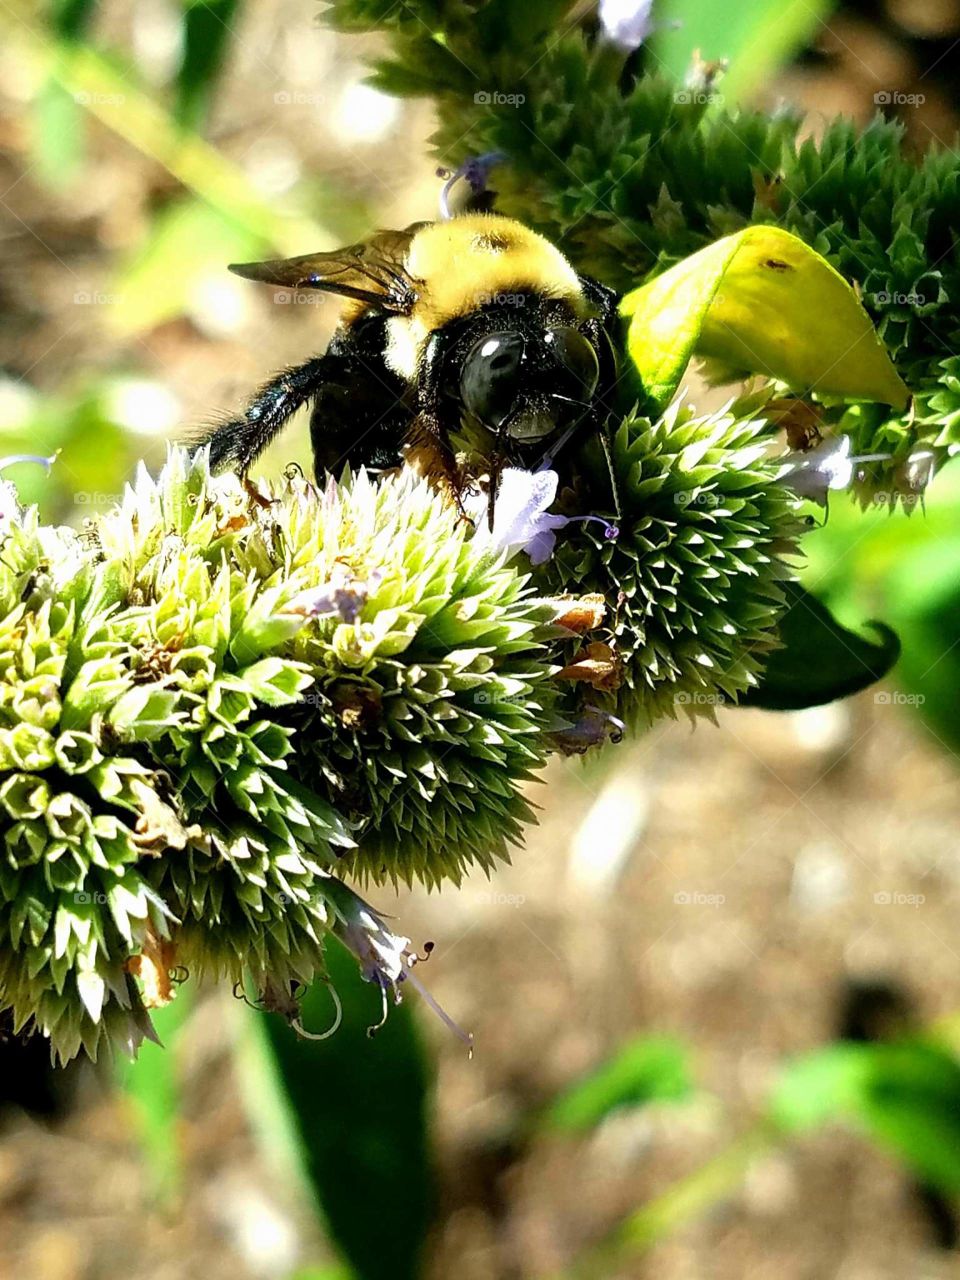 black and yellow bumblebee gathering pollen from a flower